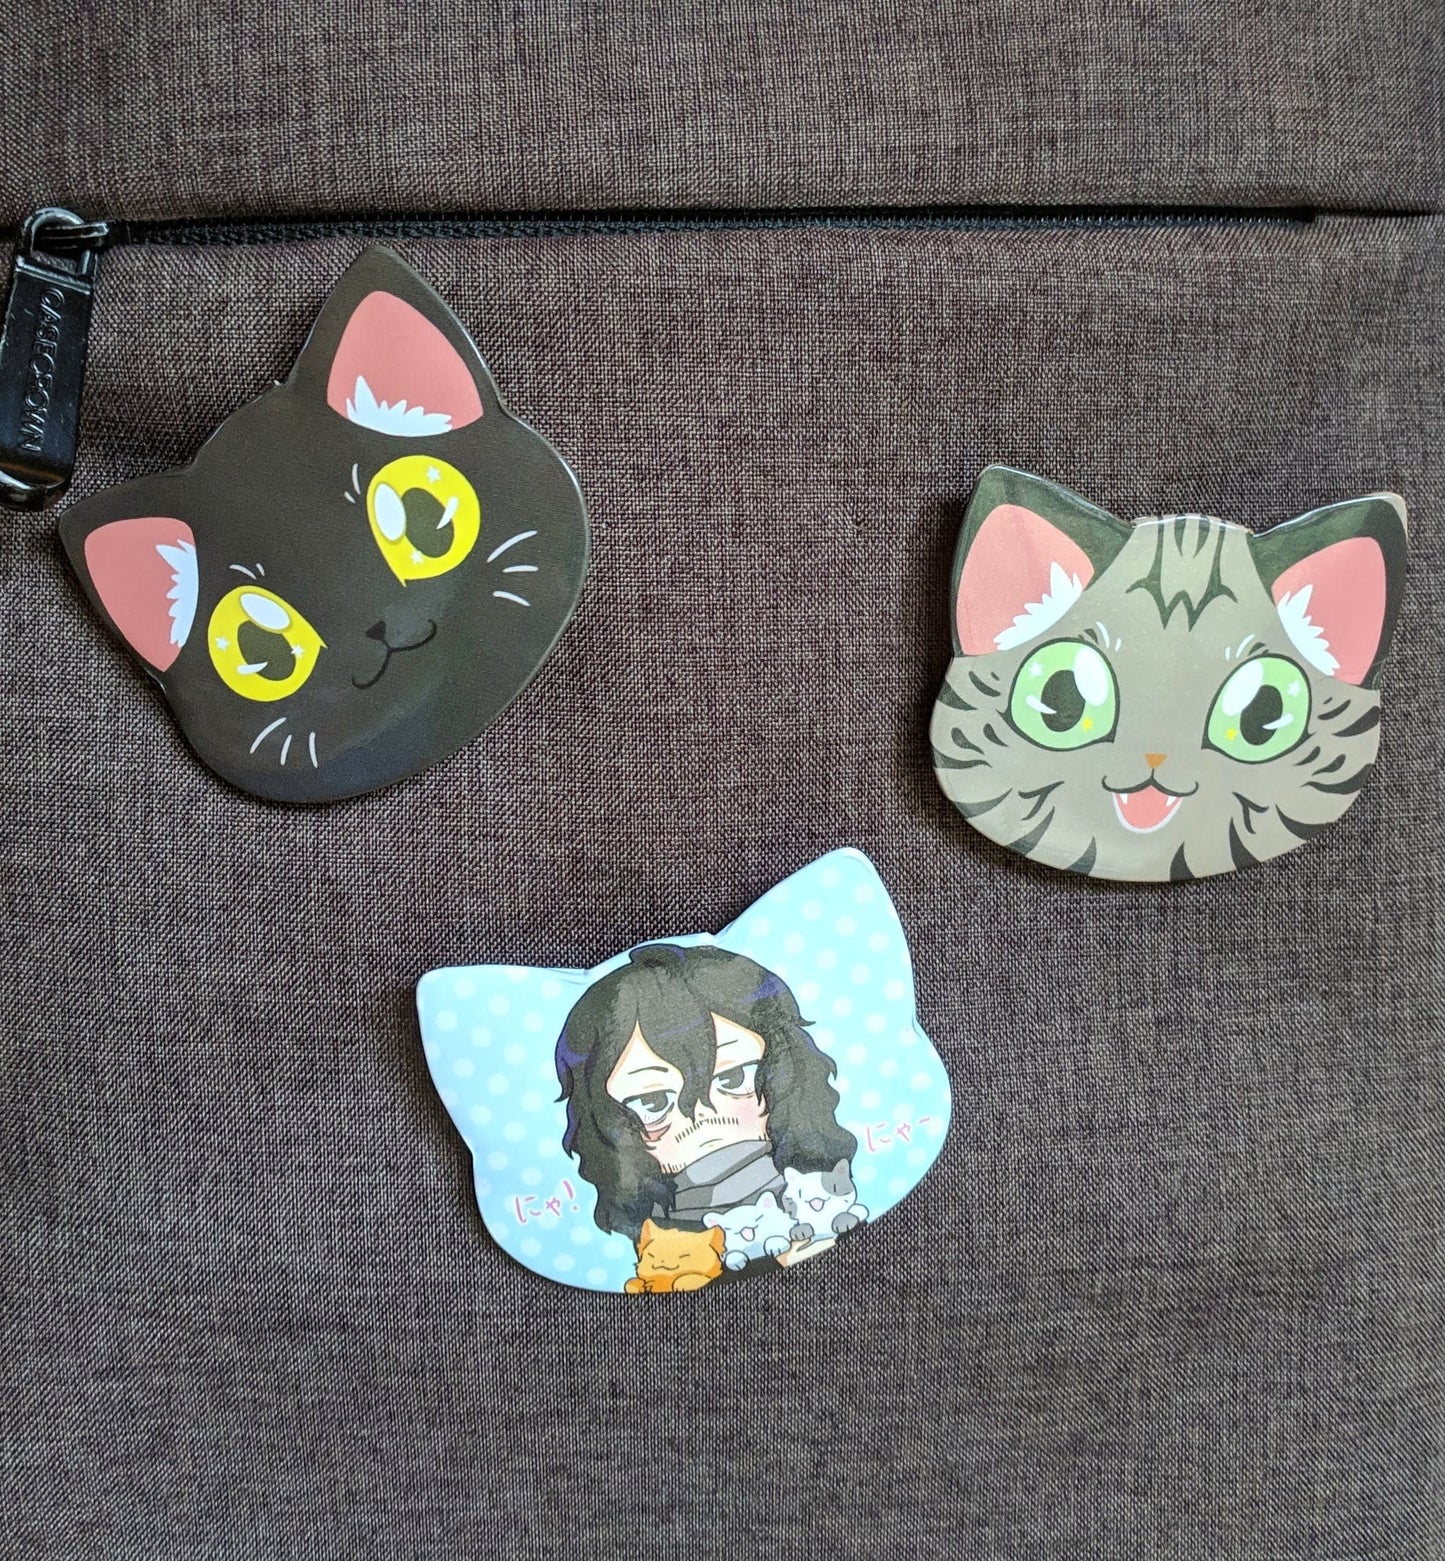 Cat buttons | Cat shaped buttons | Tabby, Sphynx, black and white cats